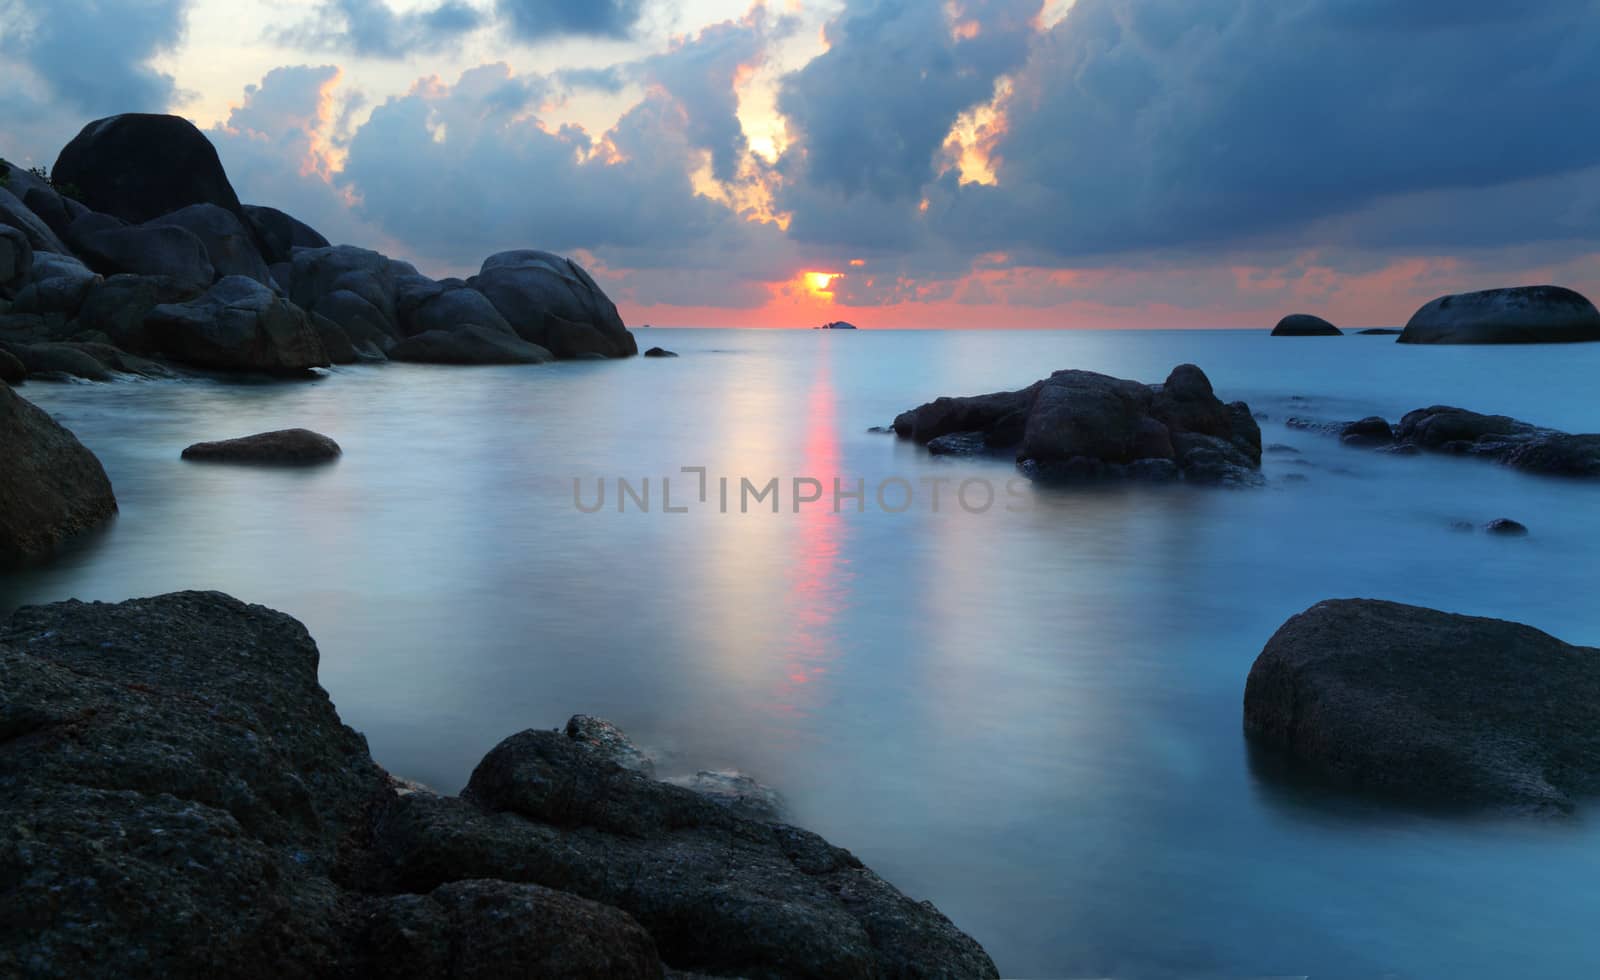 Sunset in rocky beach by photosoup